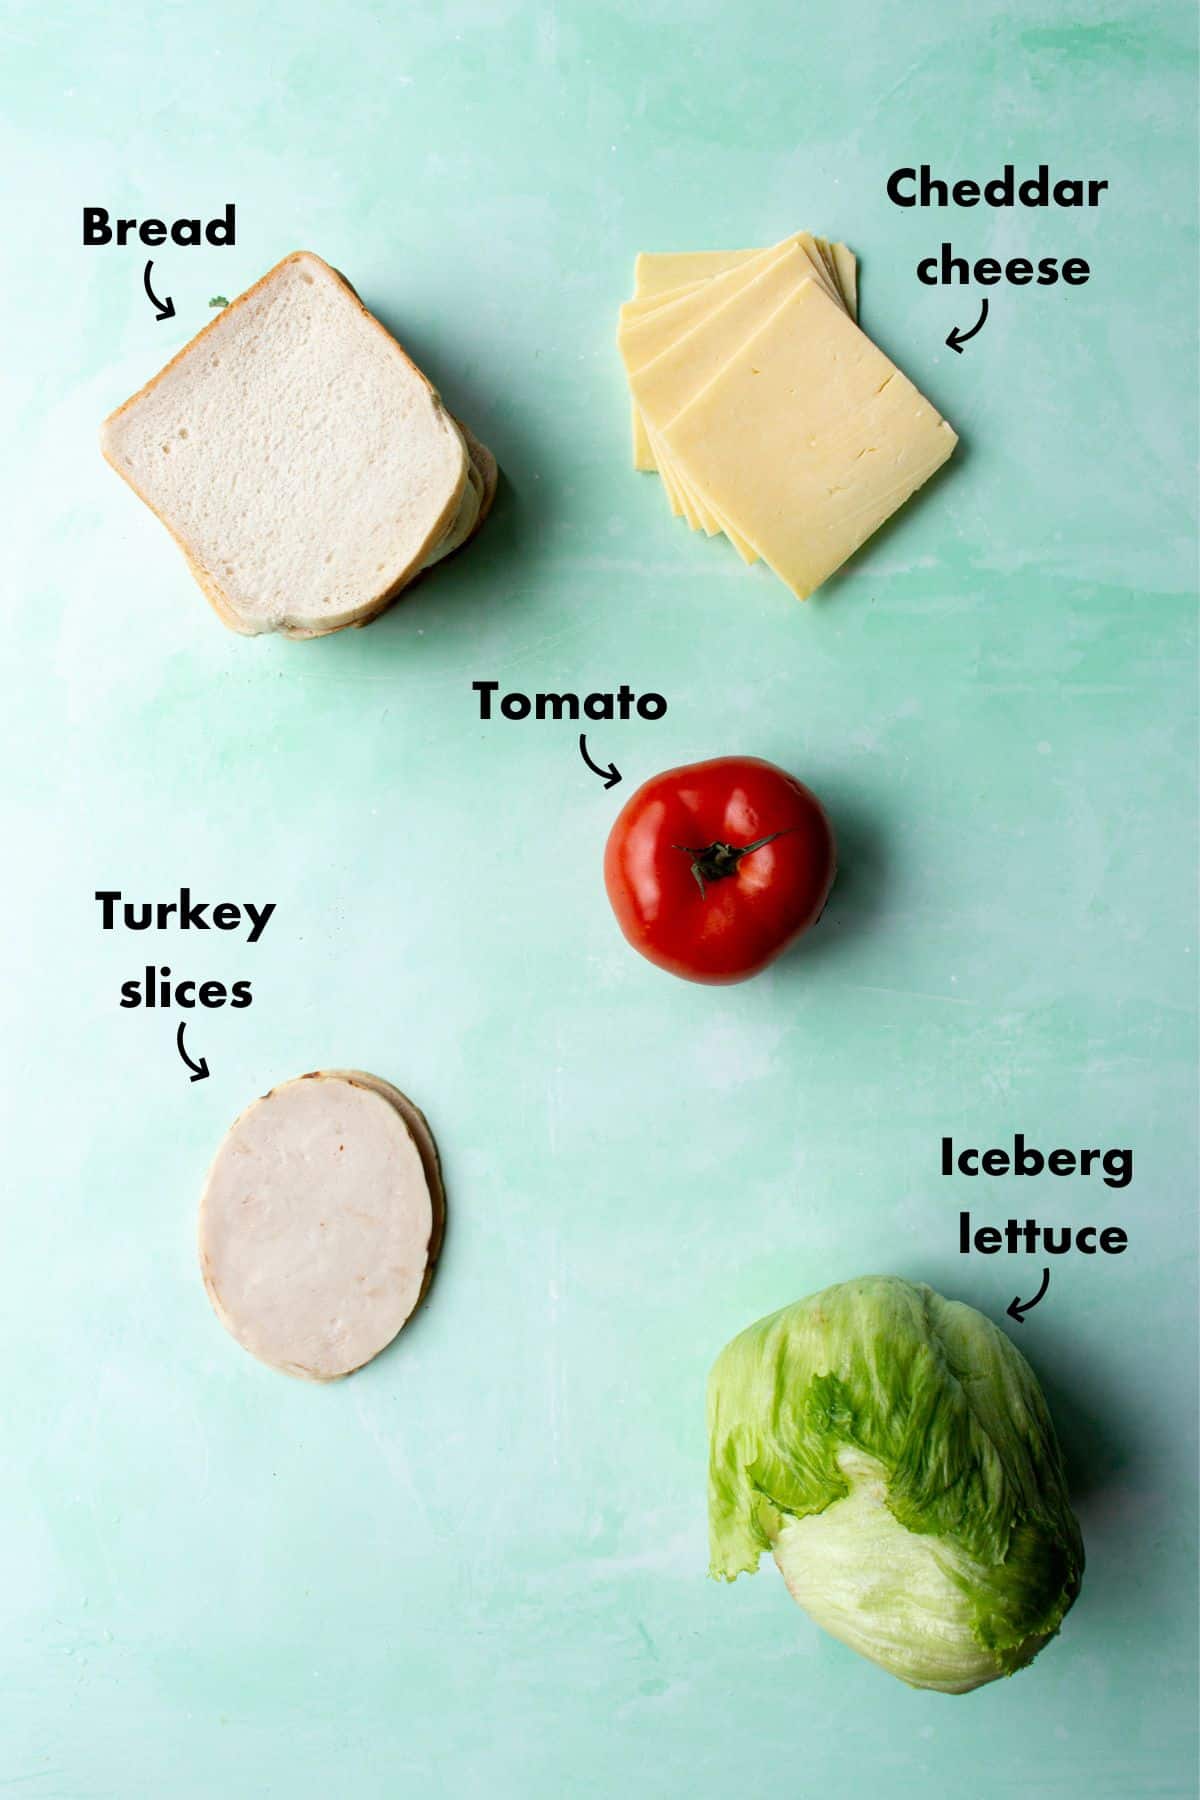 Ingredients to make turkey sandwich, sliced white bread, turkey slices, lettuce, tomato and cheddar cheese slices.